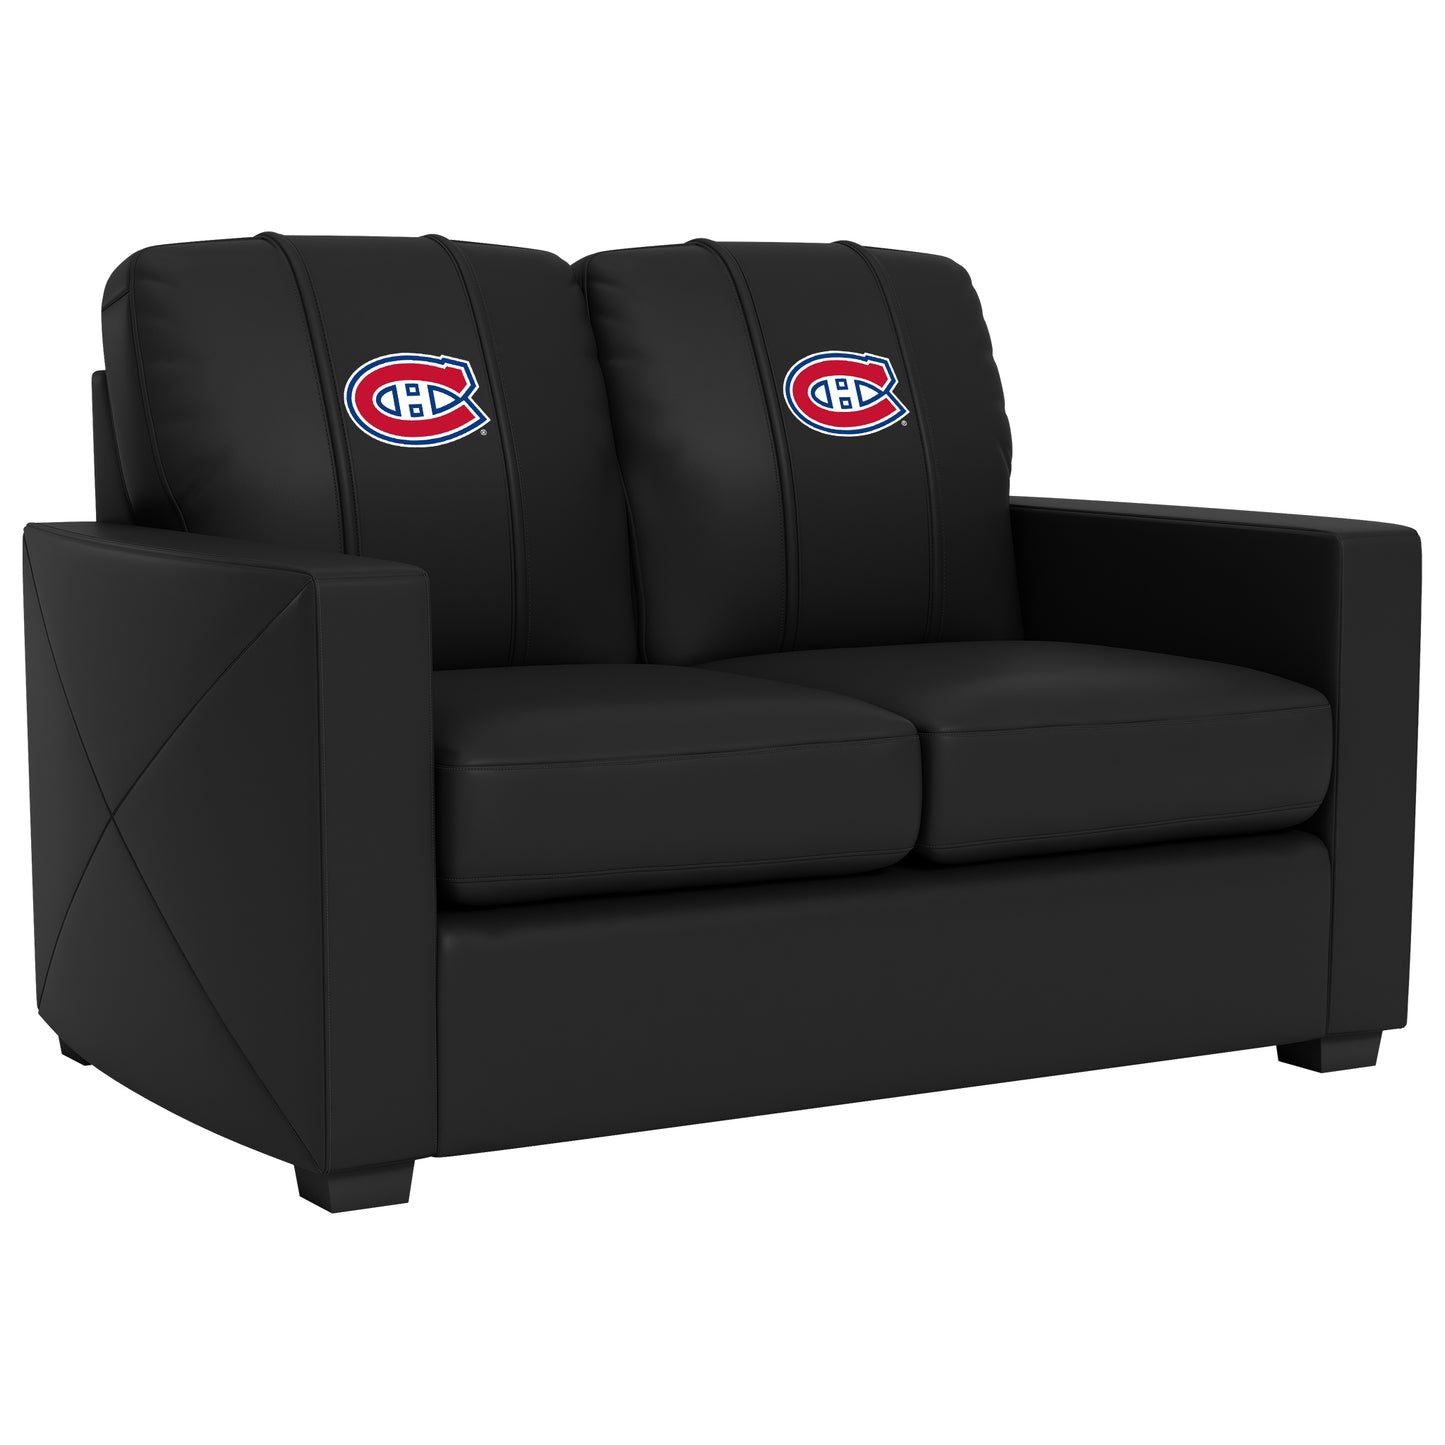 Silver Loveseat with Montreal Canadiens Logo